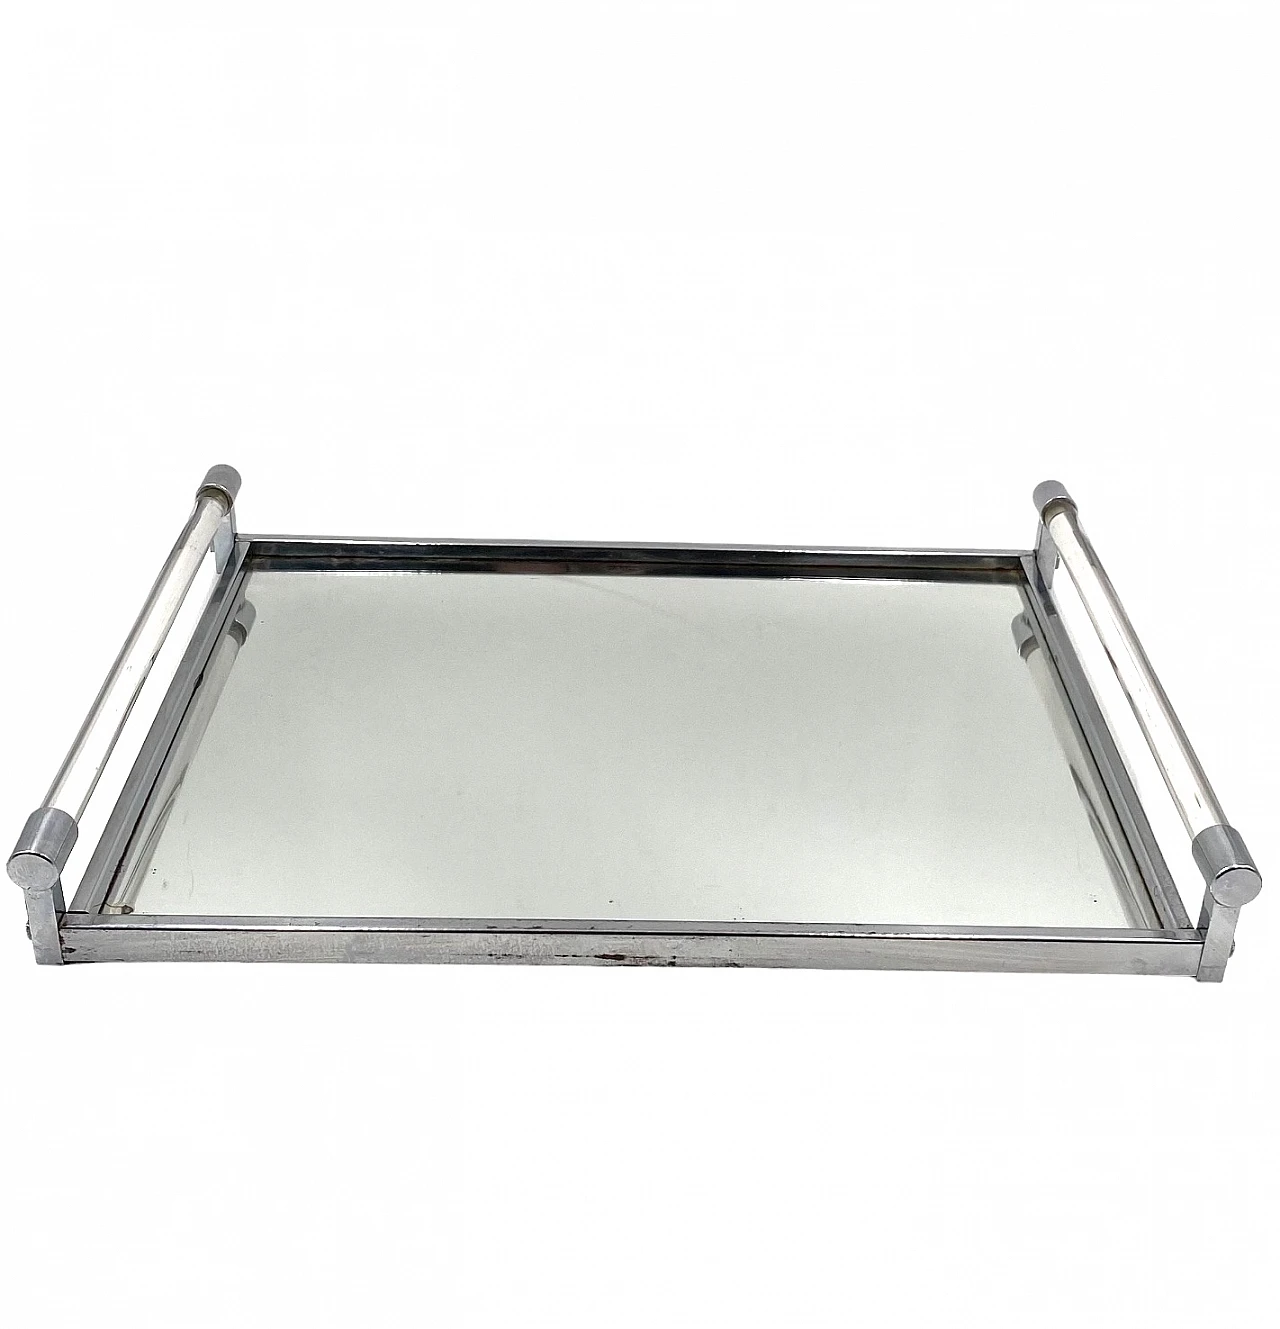 Mirrored tray with lucite details by Jacques Adnet, 1940s 11